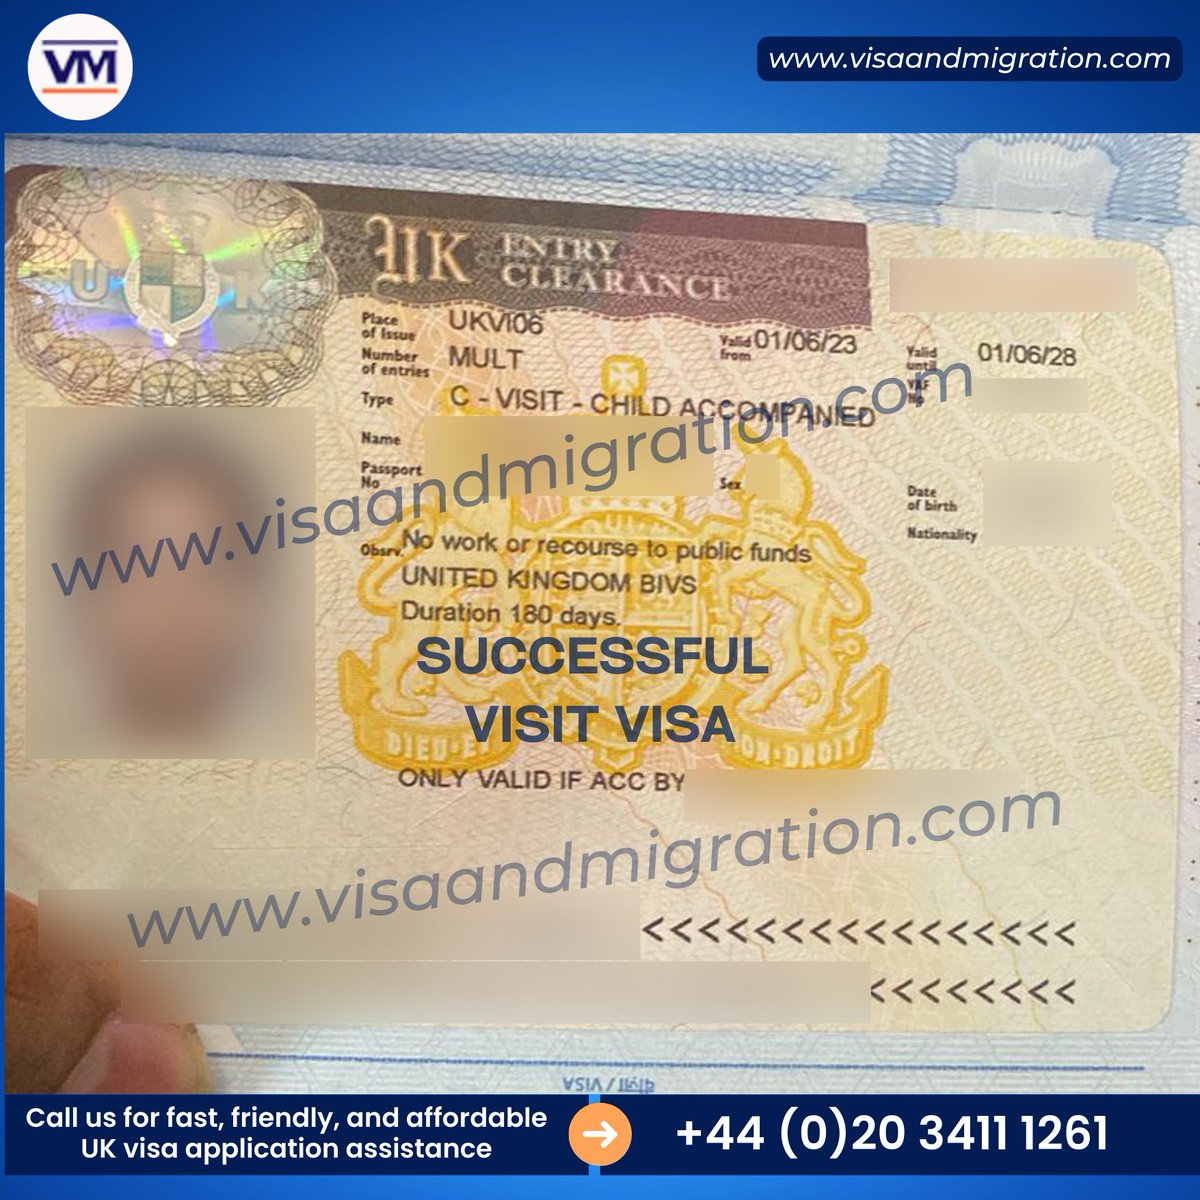 It gives us great pleasure to announce that another of our clients obtained a successful UK Visit Visa!
To know more about UK Visit visa, click here.

Get in touch with our visa solicitors today to attain a UK visa.
+44(0) 20 3411 1261
visaandmigration.com

#ukvisitvisa #visa